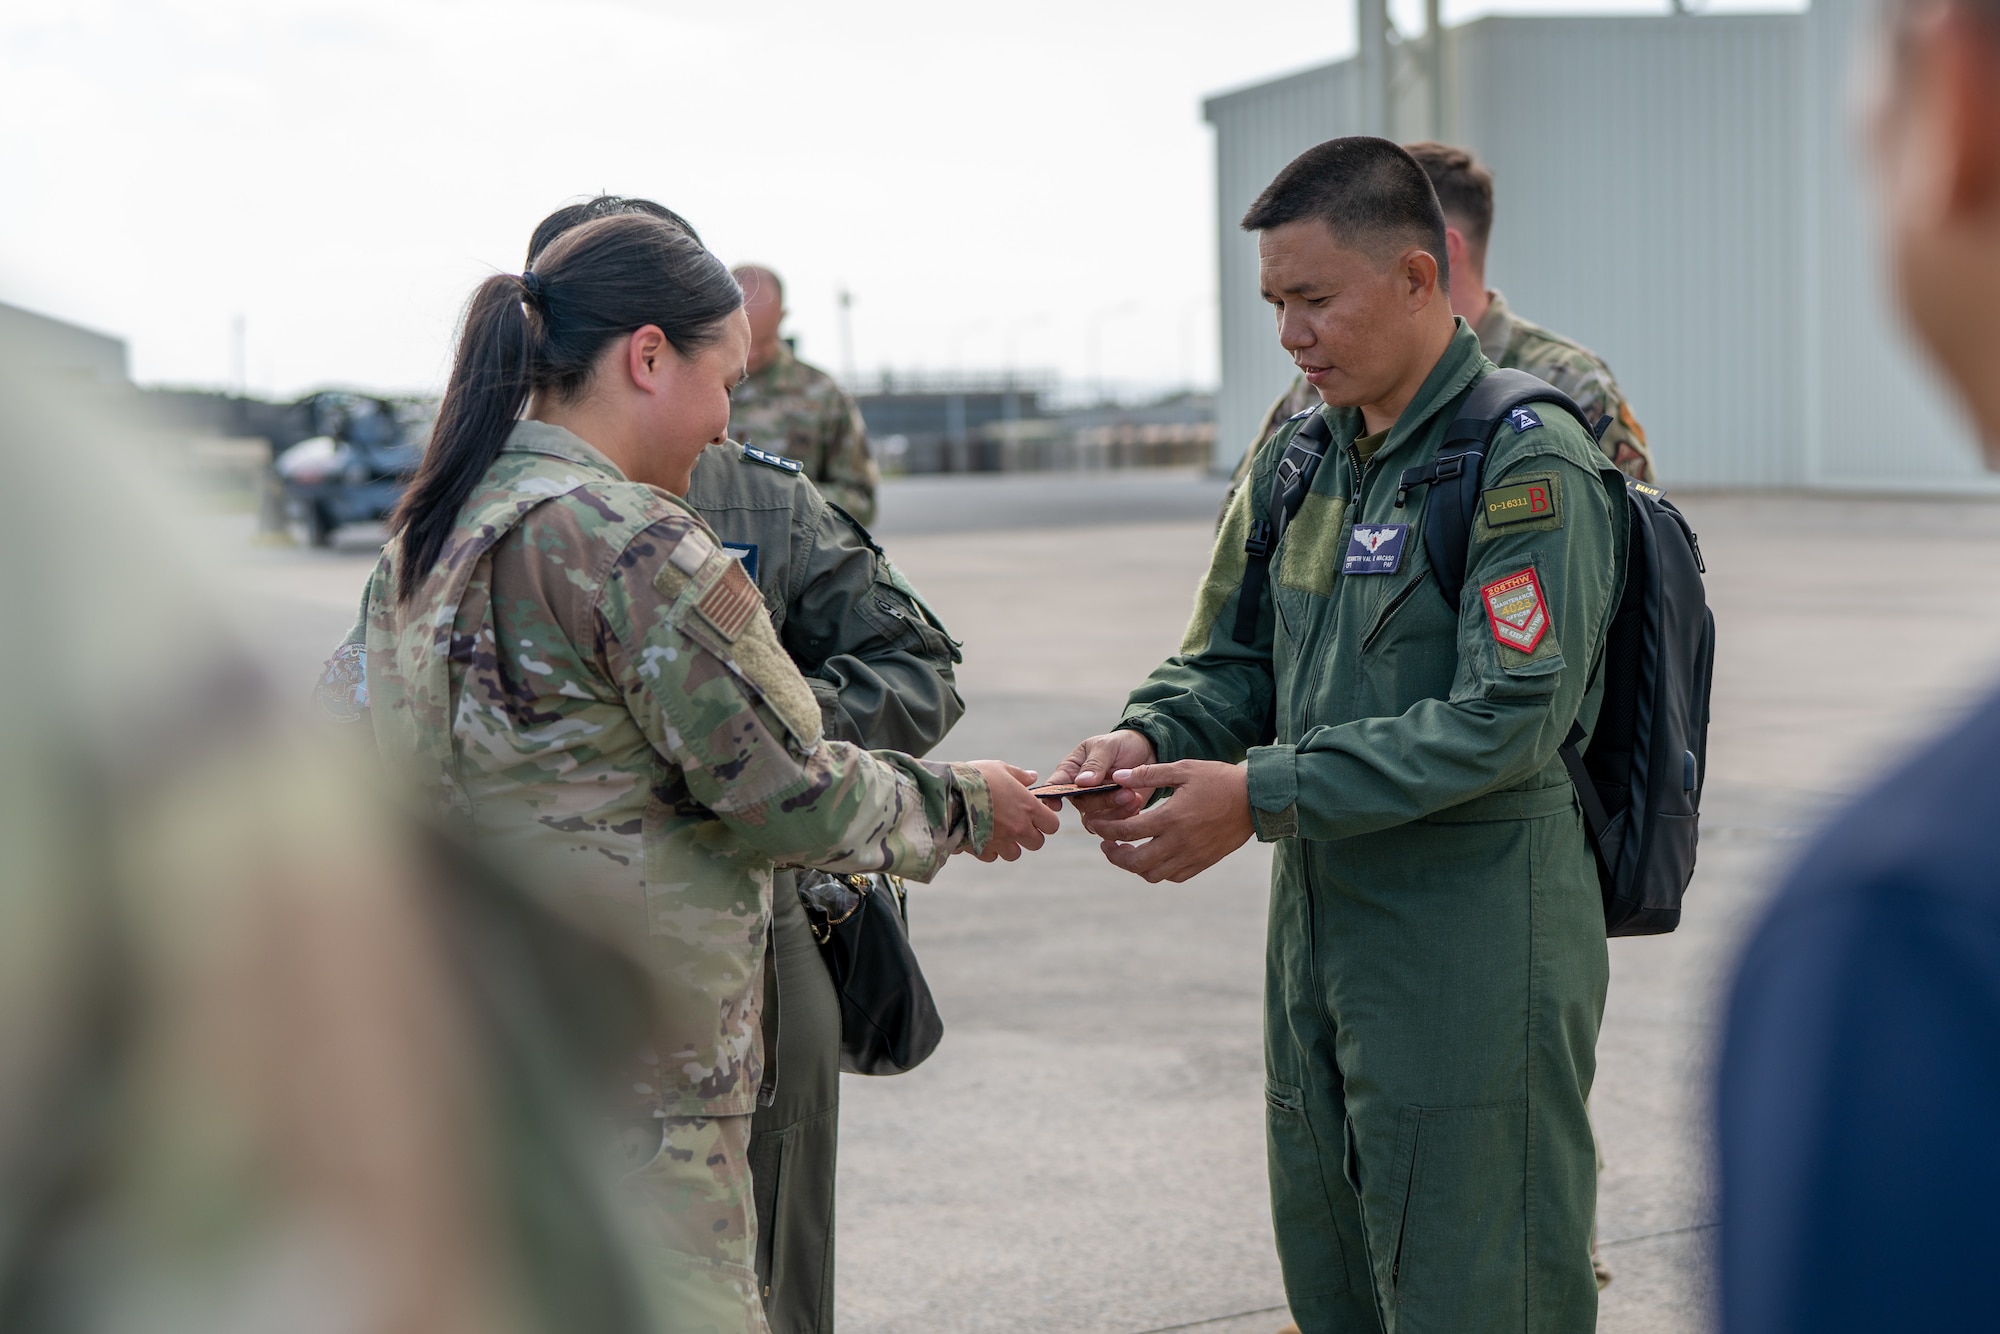 A Philippine Air Force member and an Airman trade patches.